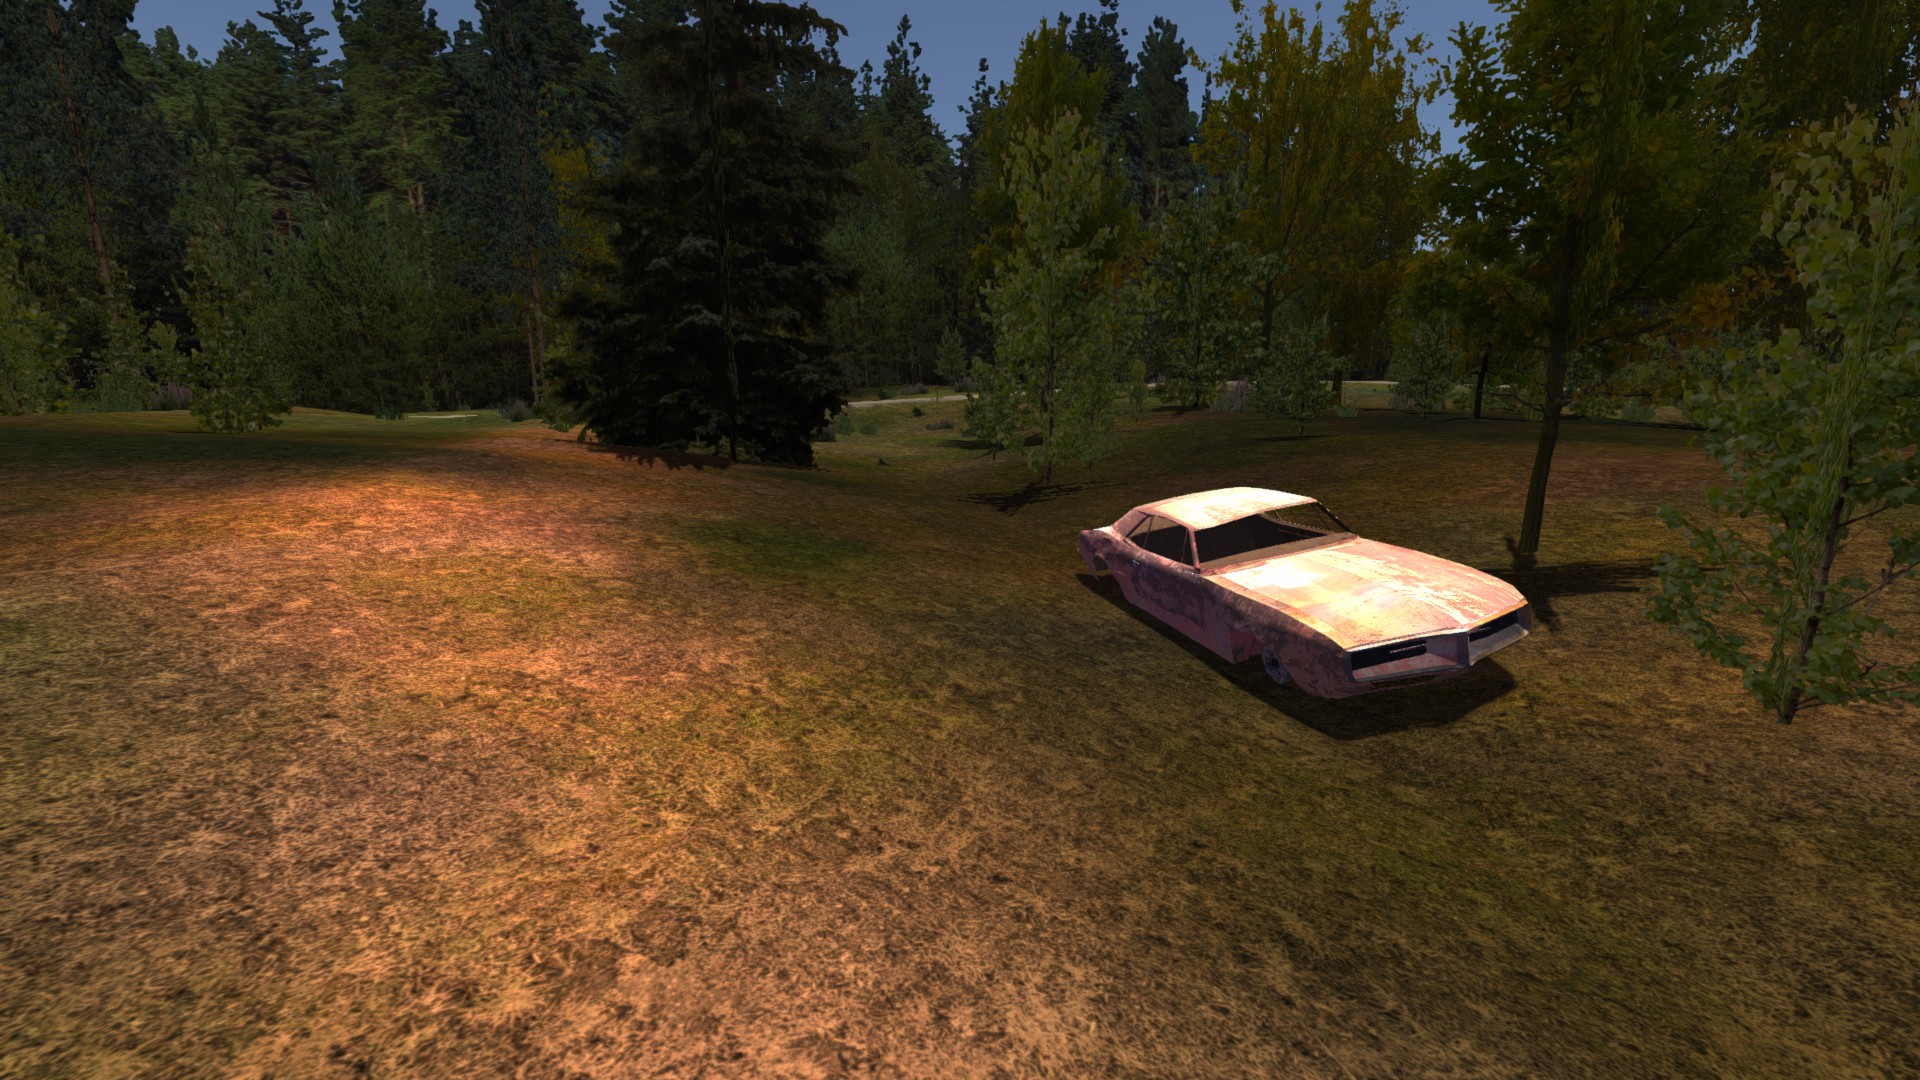 My Summer Car at the best price